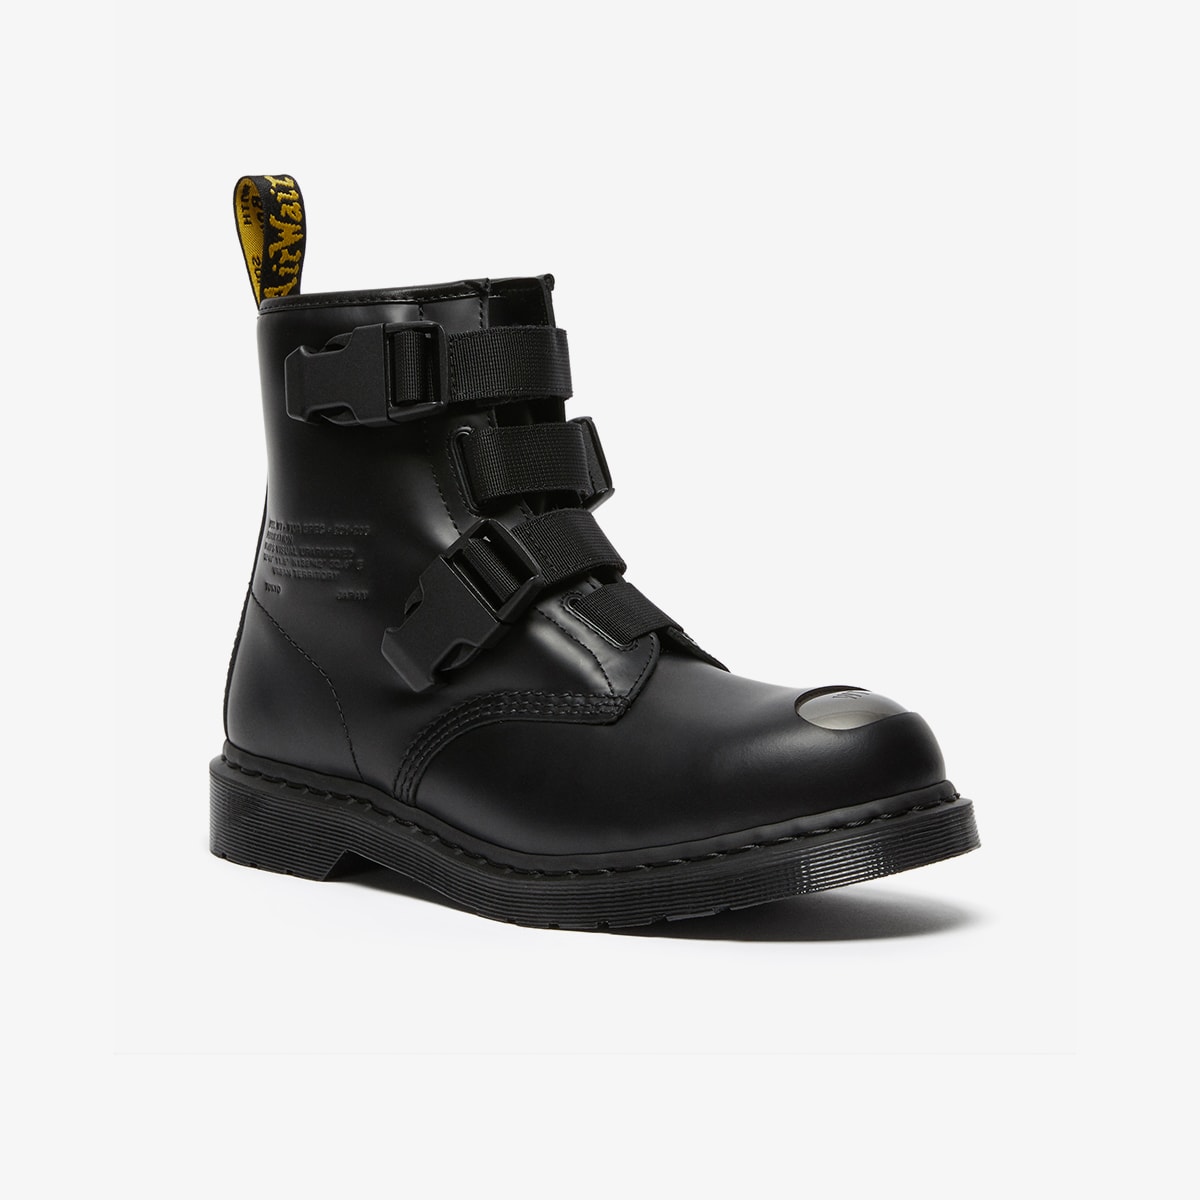 Dr. Martens x WTAPS 1460 Remastered Boot (Black) | END. Launches